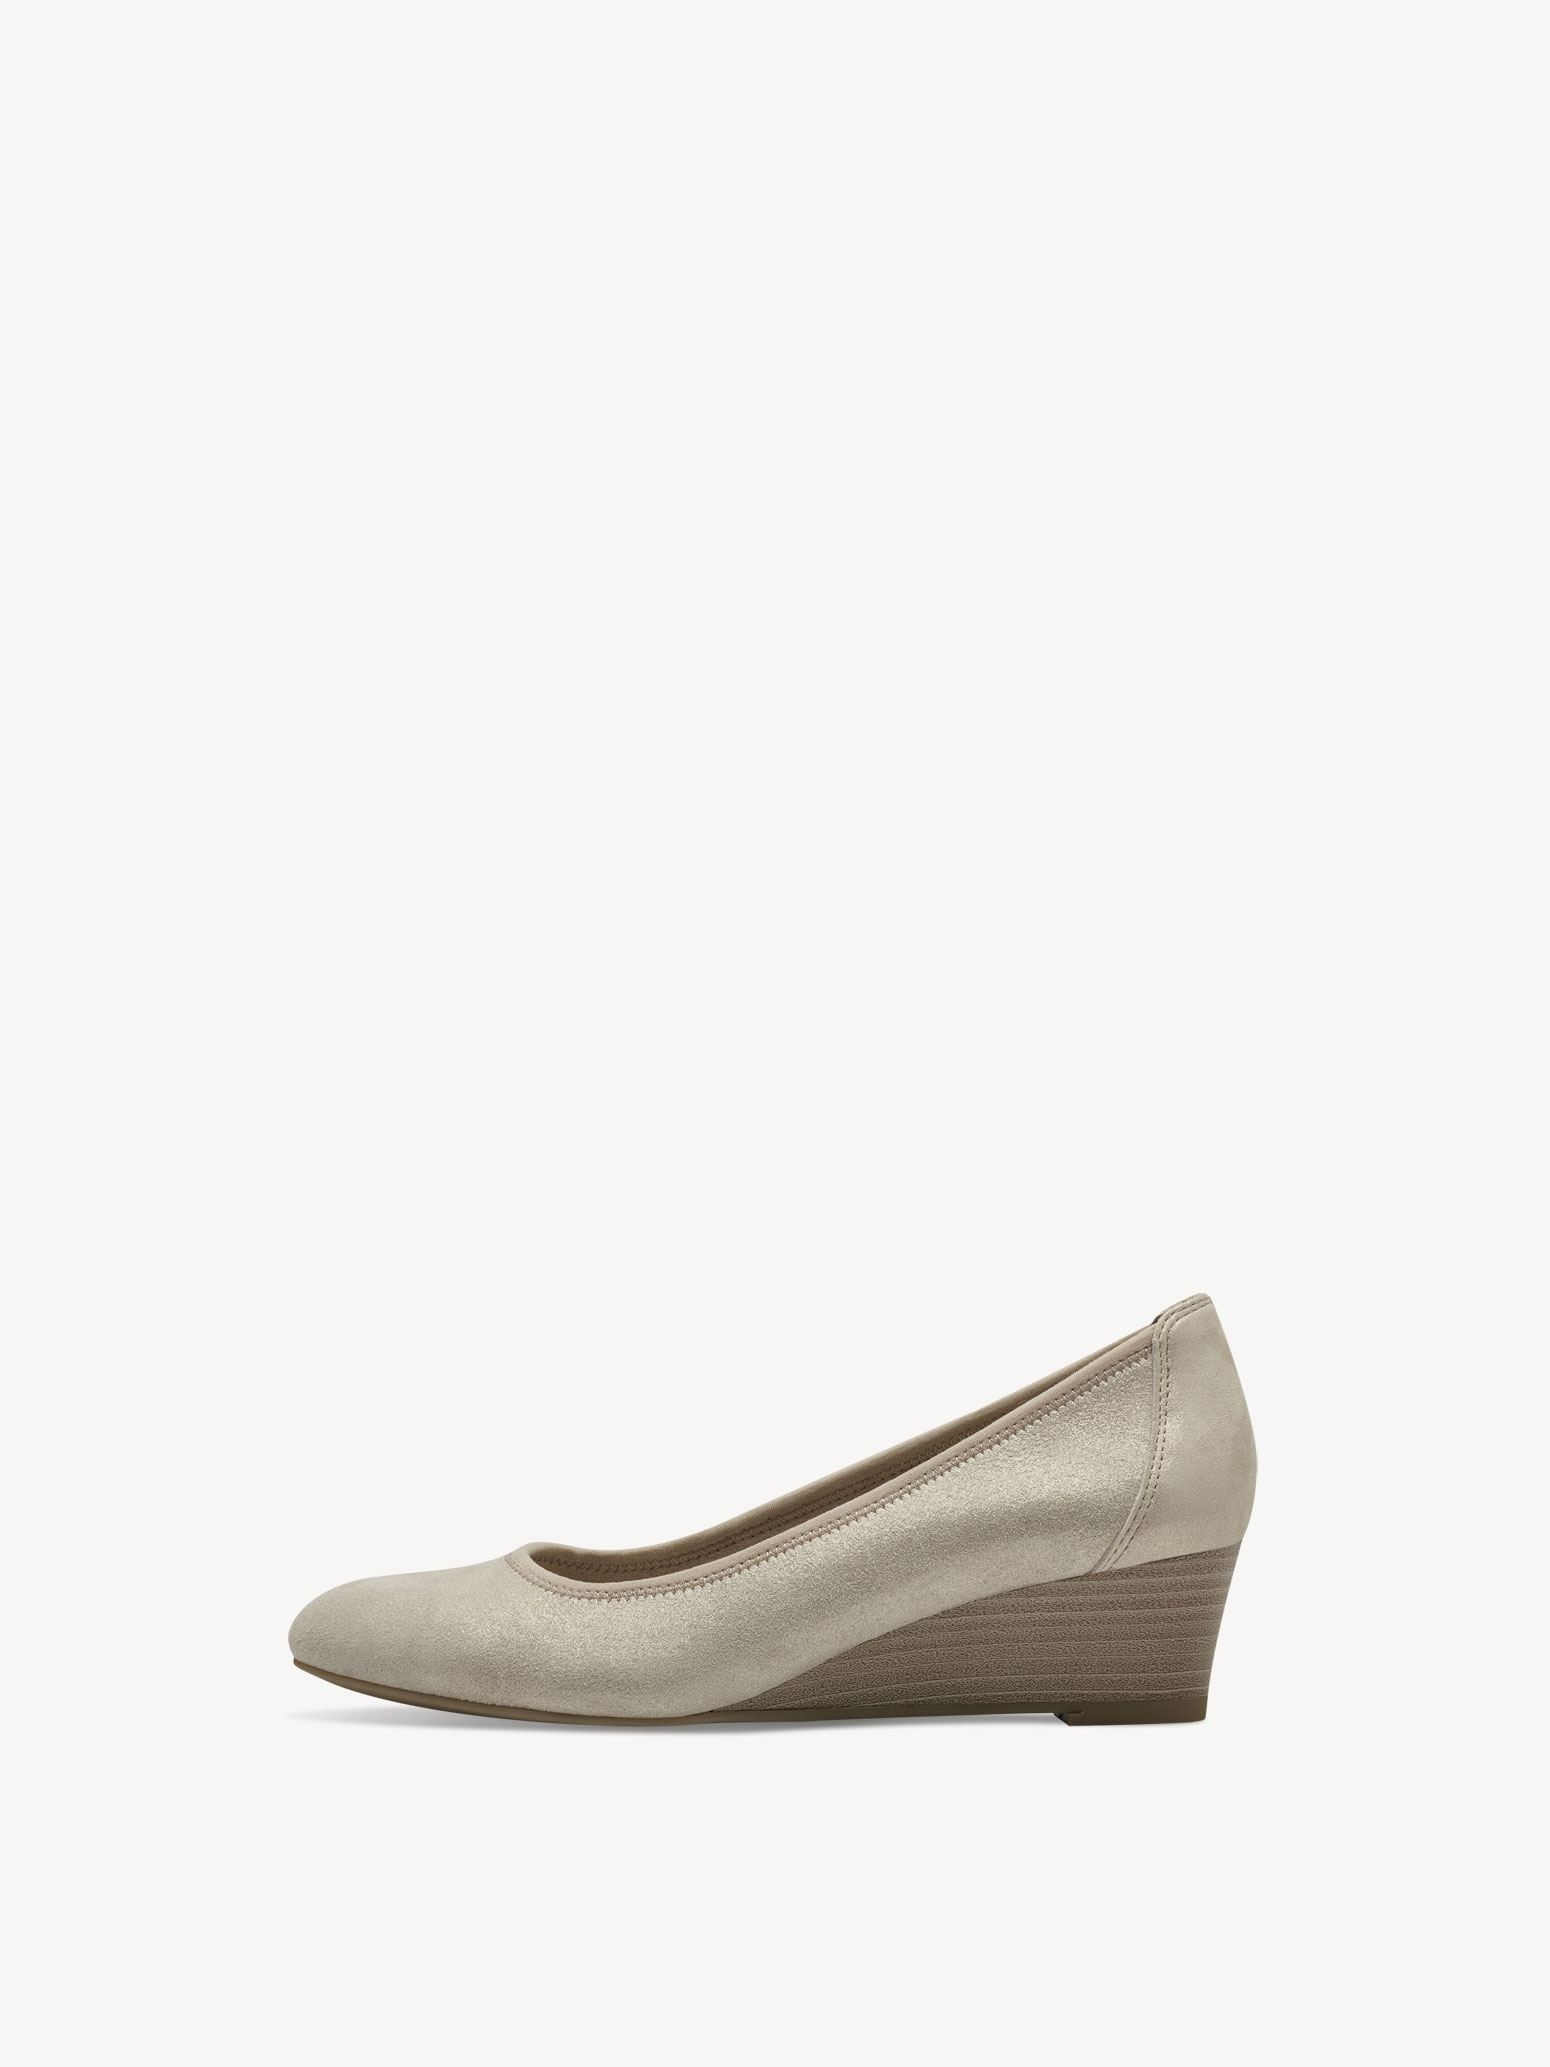 Leather Wedge pumps - beige